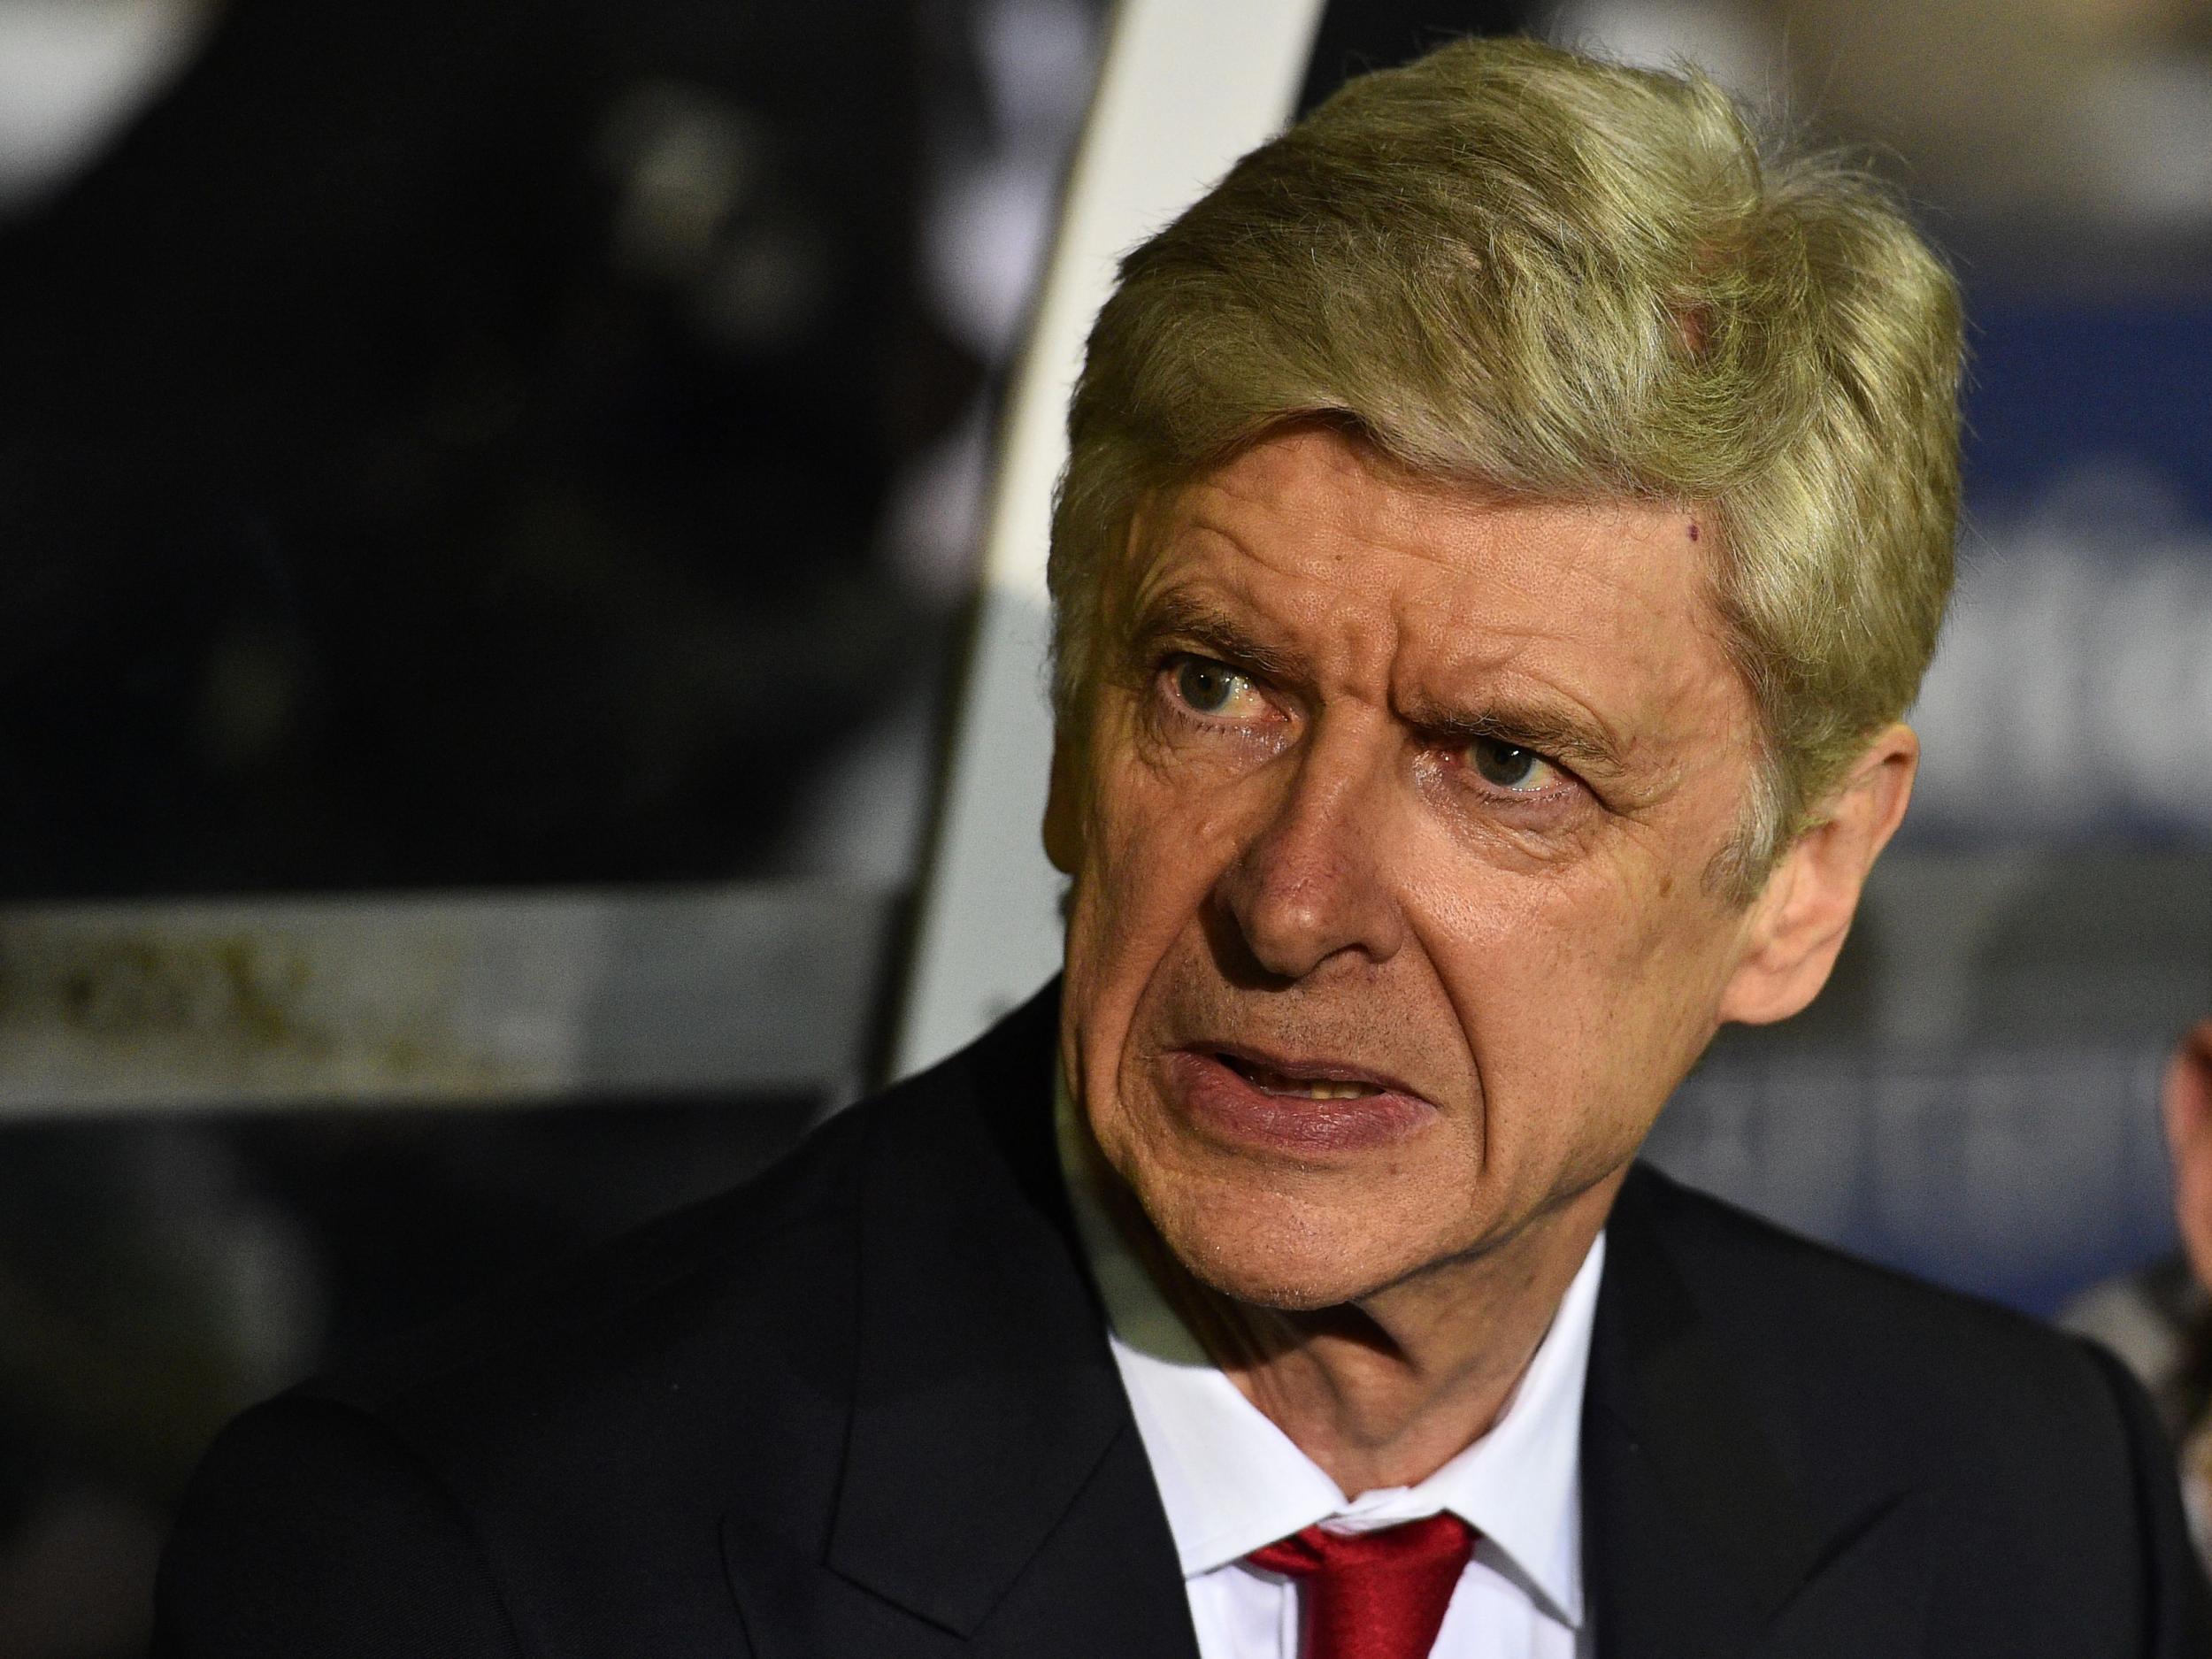 Wenger wants to remain in Europe